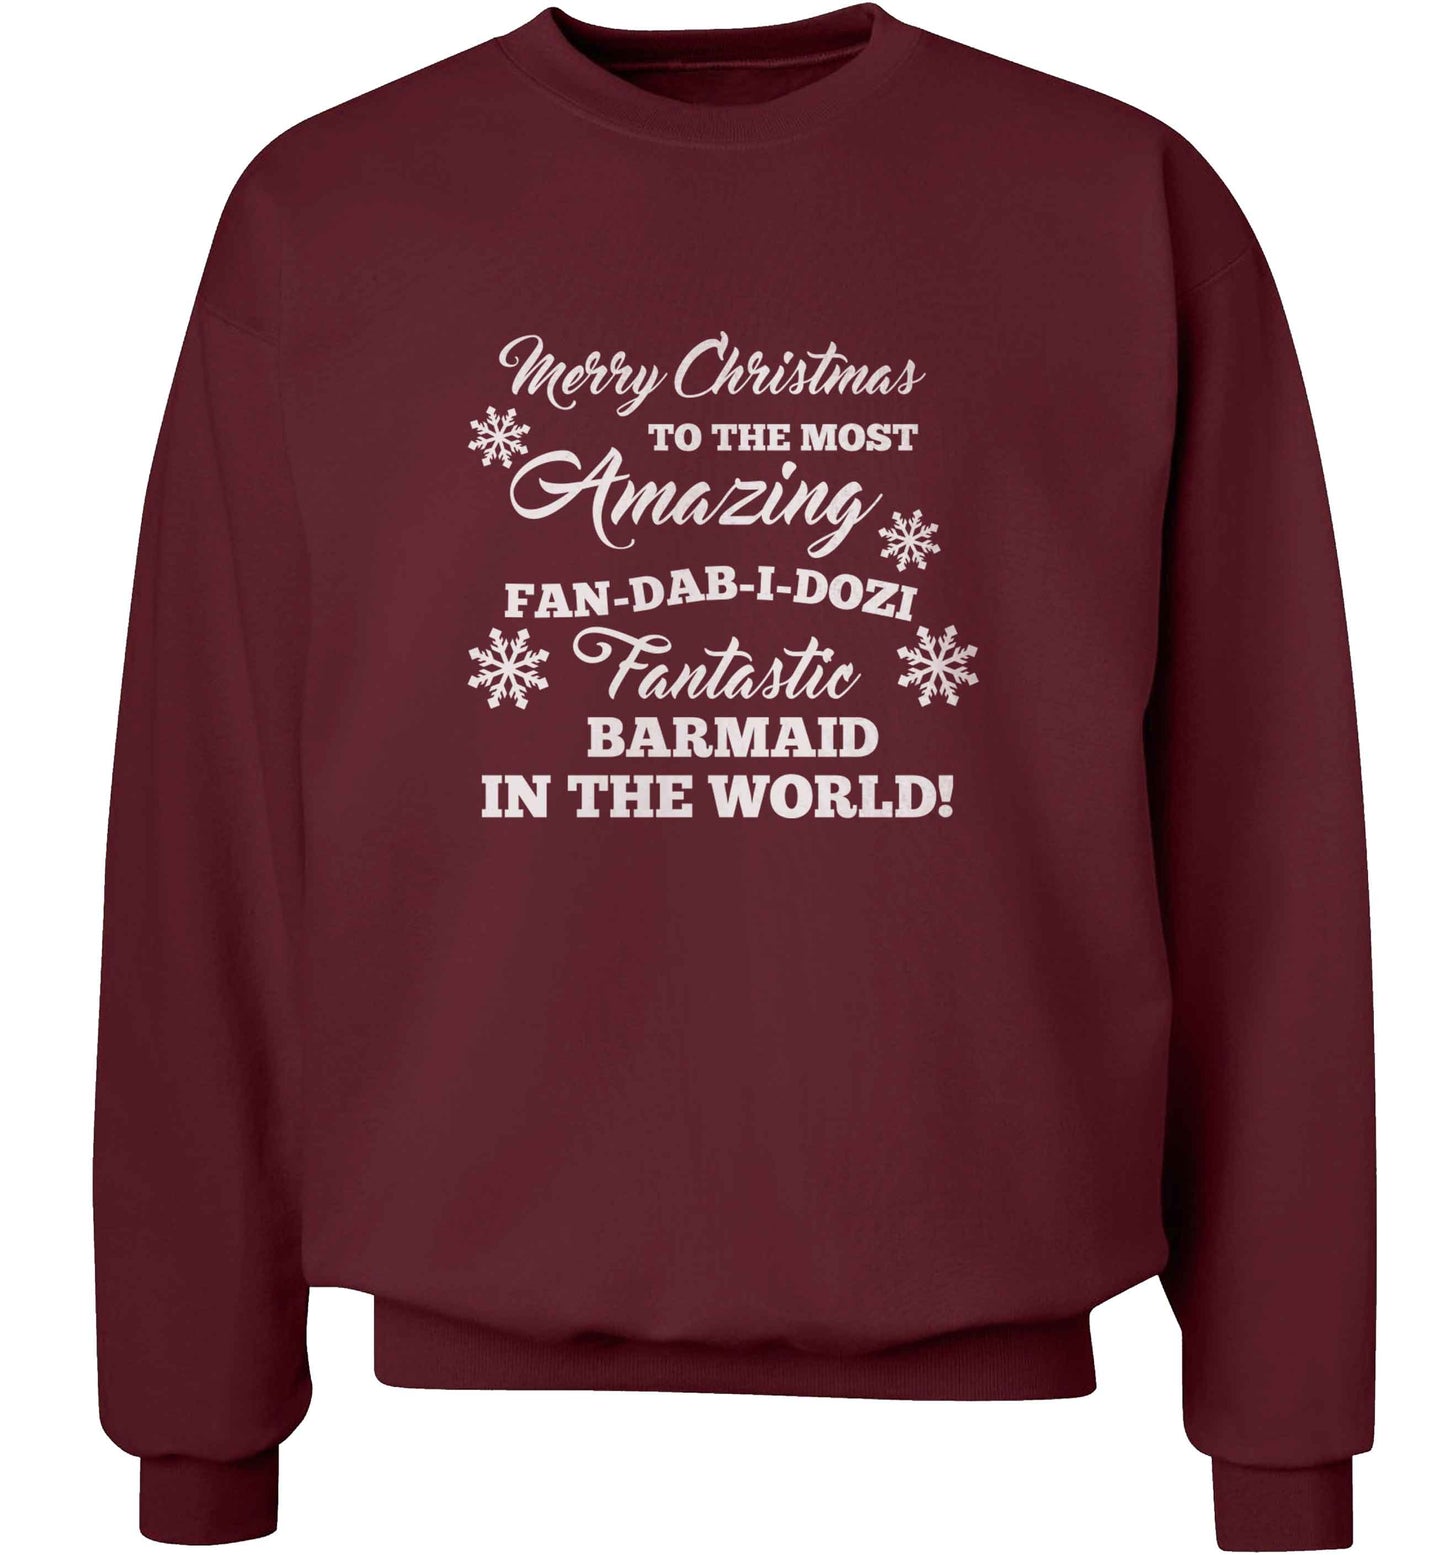 Merry Christmas to the most amazing barmaid in the world! adult's unisex maroon sweater 2XL